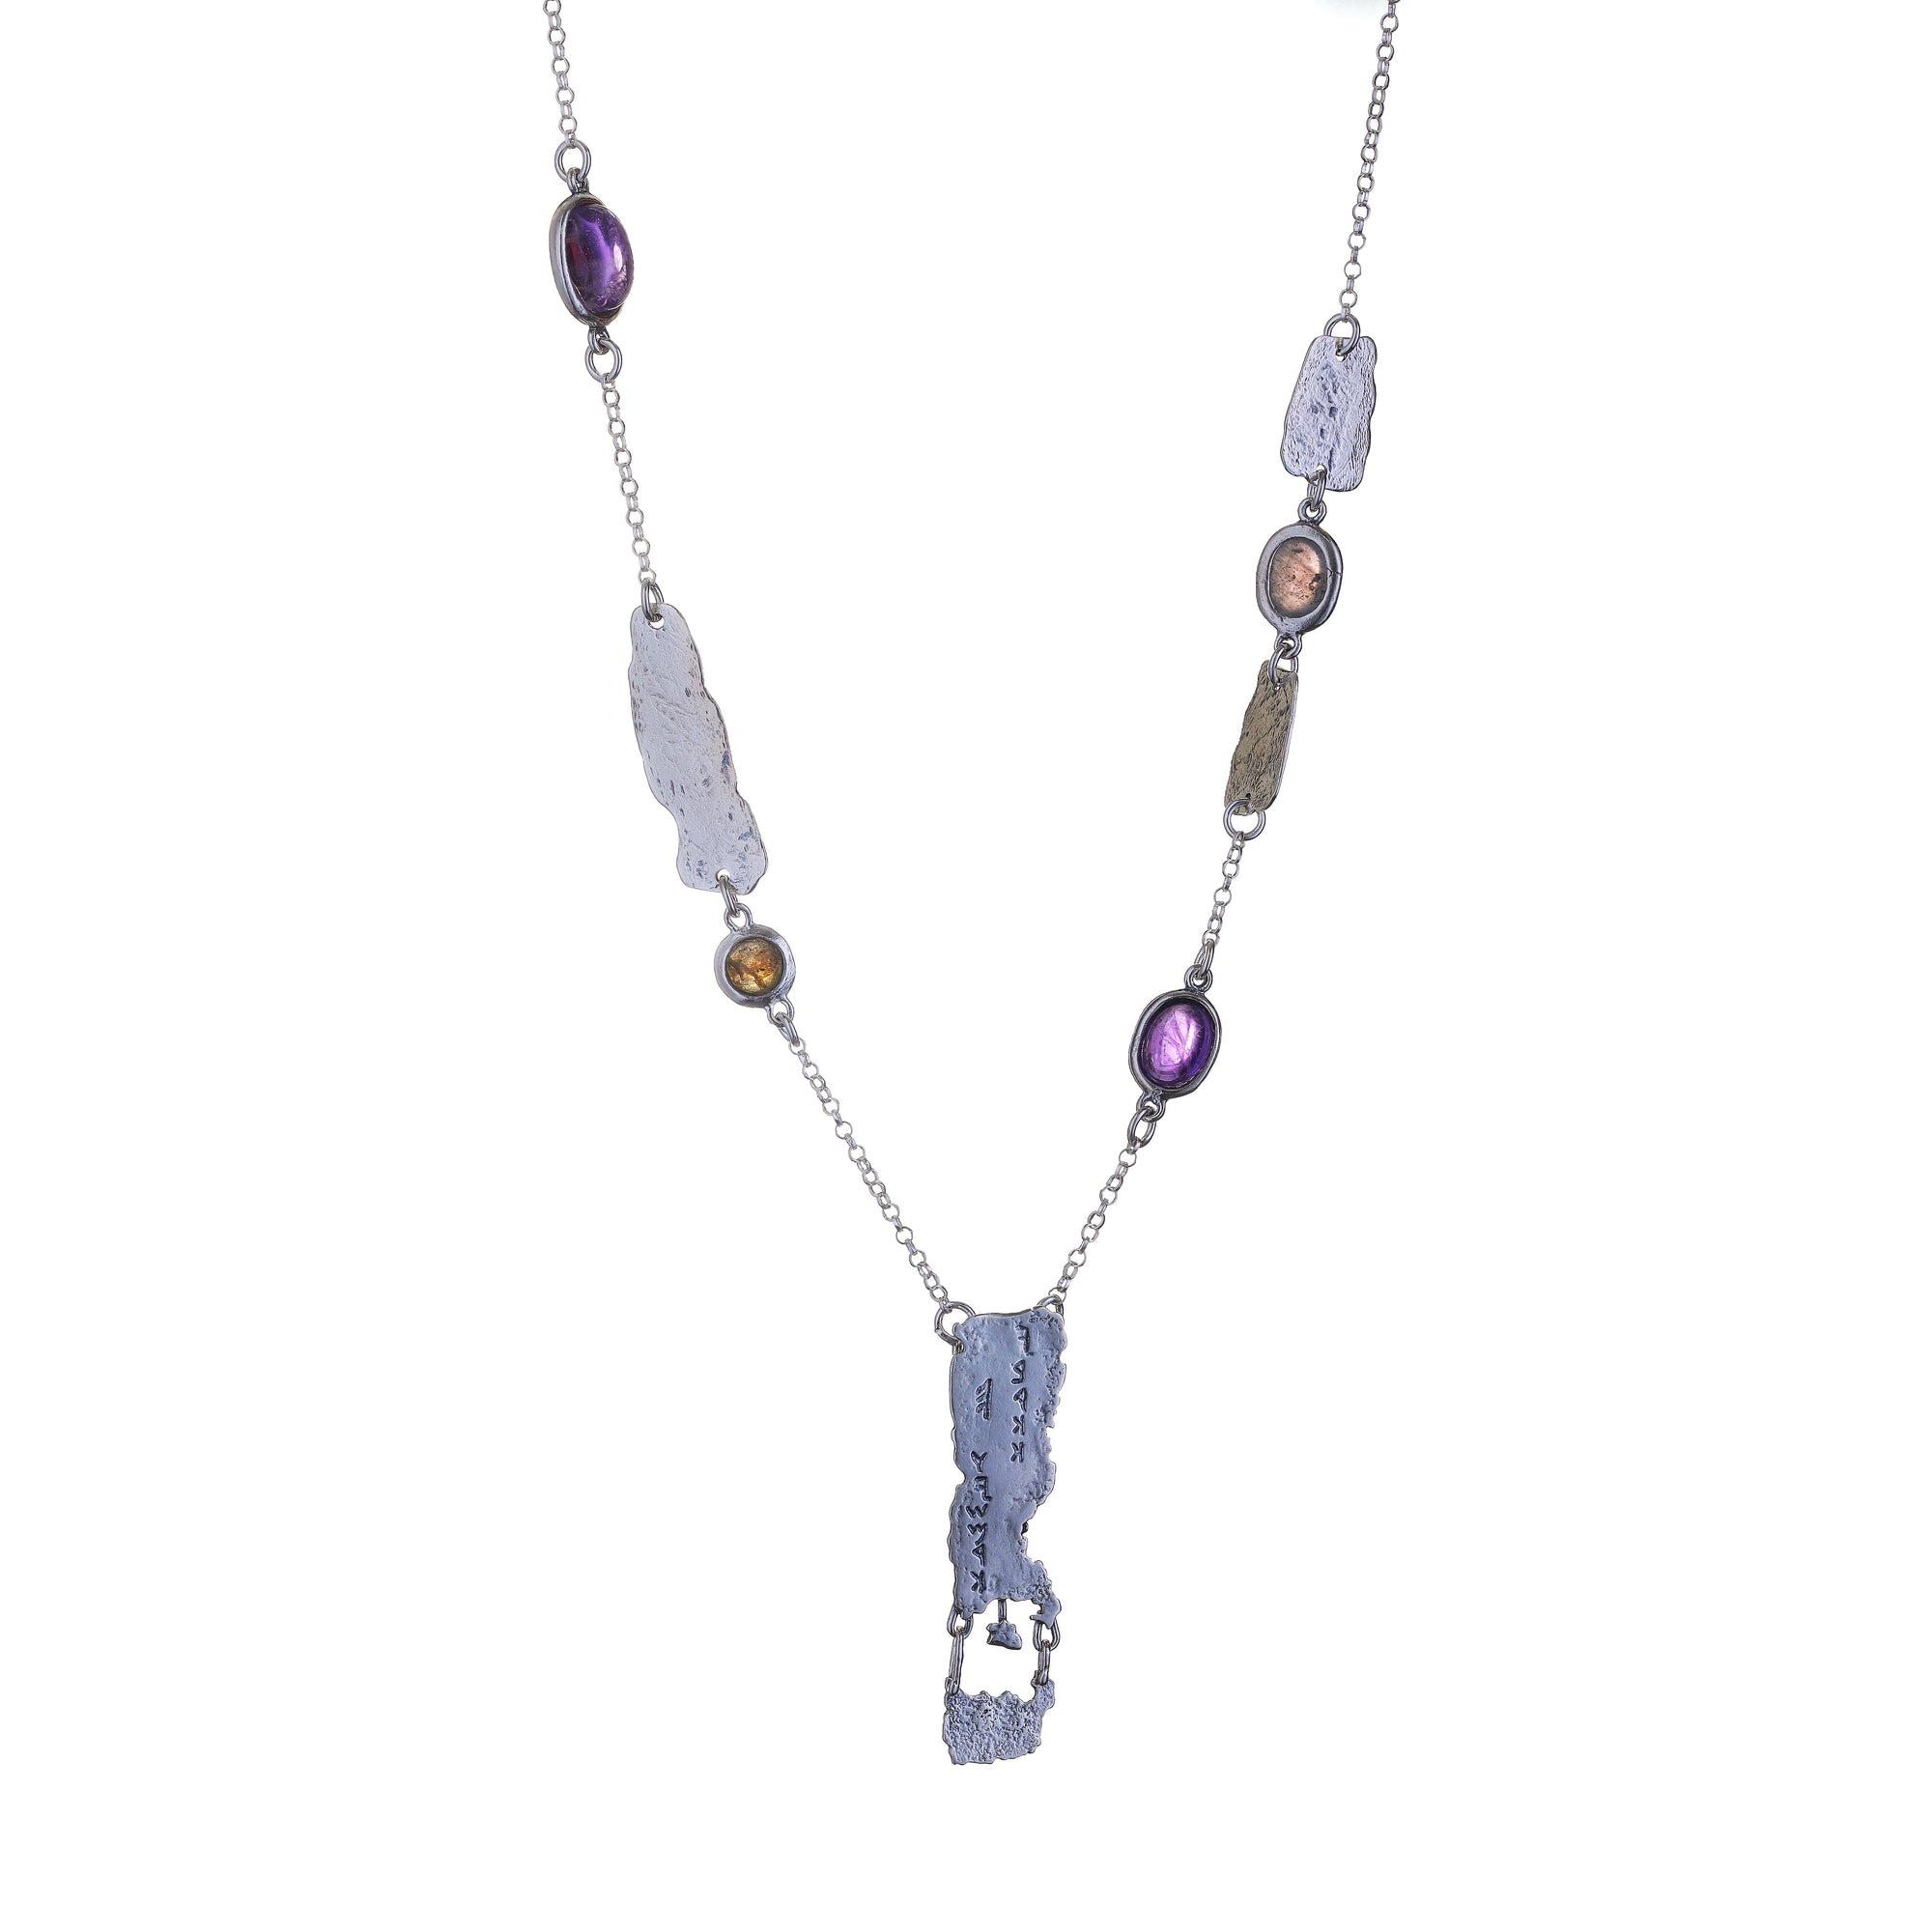 STONES AND Sterling Silver Priestly Blessing Necklace